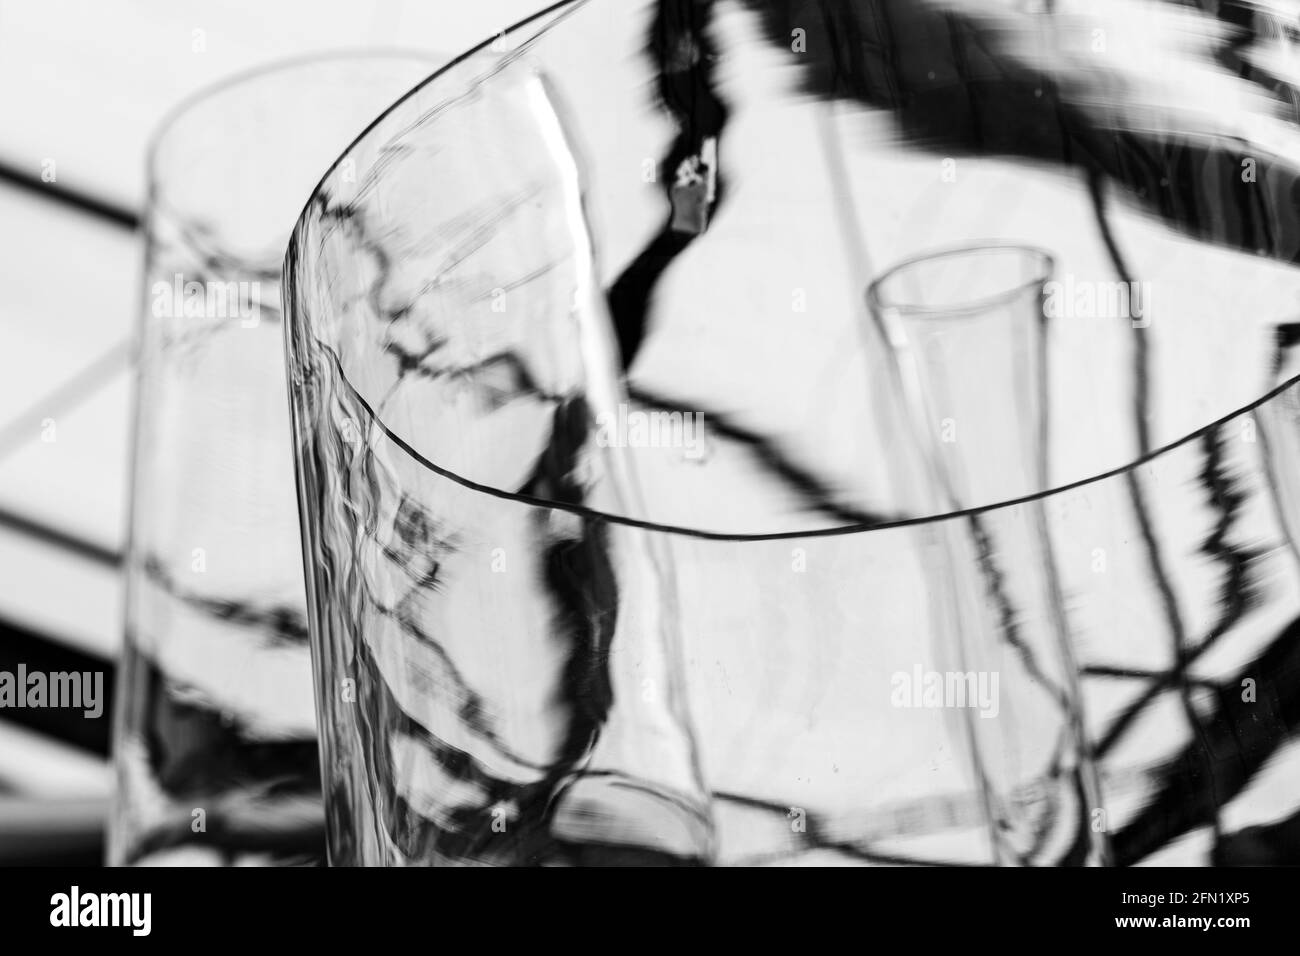 Abstract glass in black and white Stock Photo